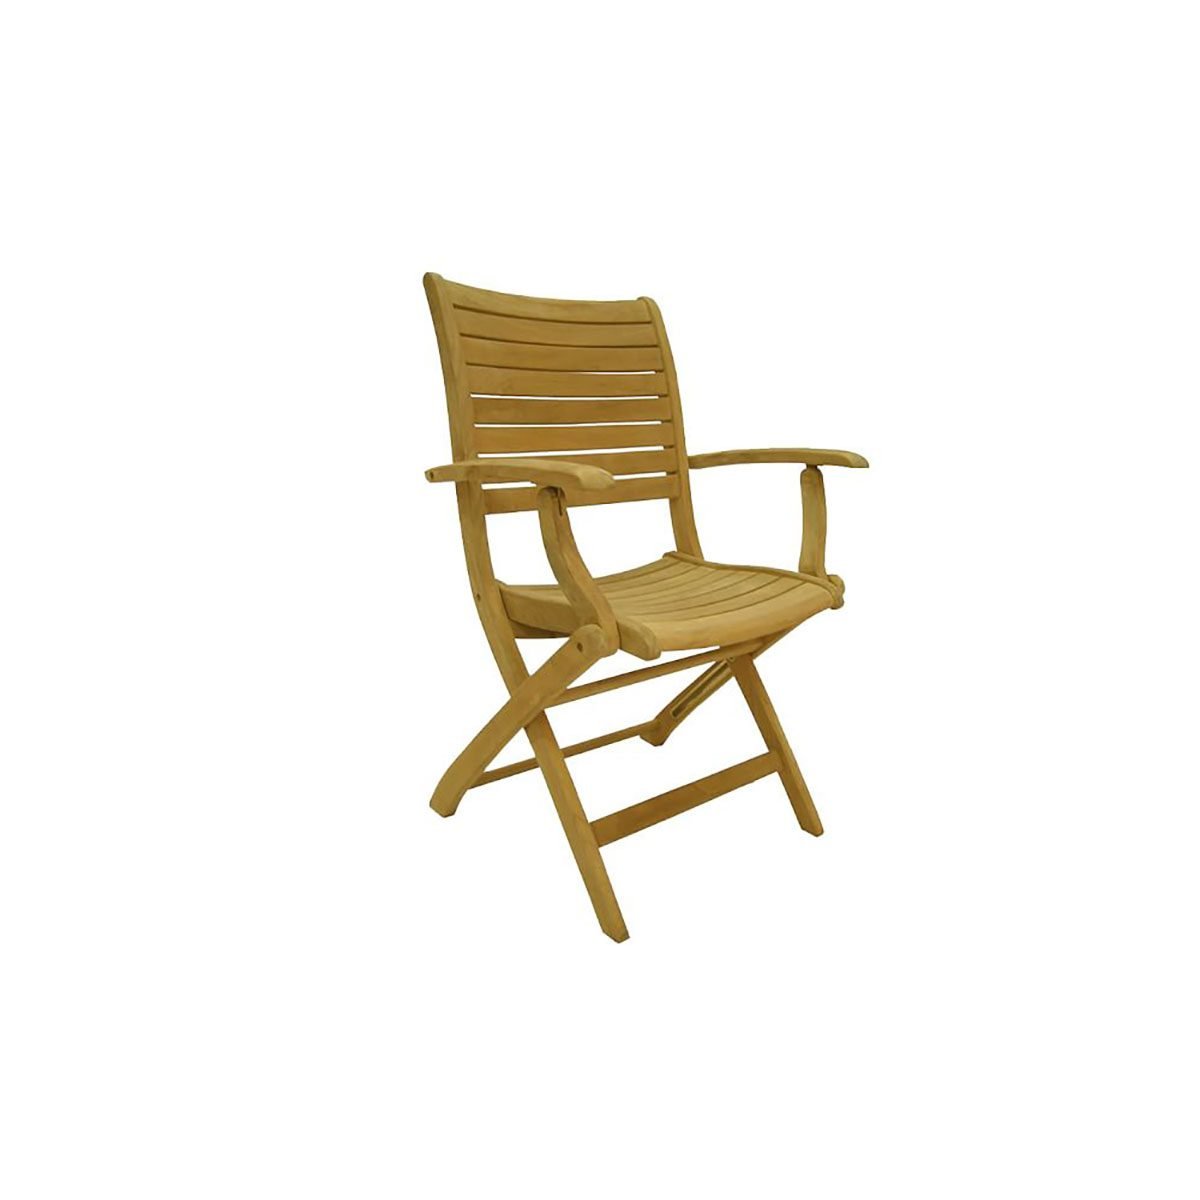 10 Best Outdoor Folding Chairs for 2020 | The Family Handyman